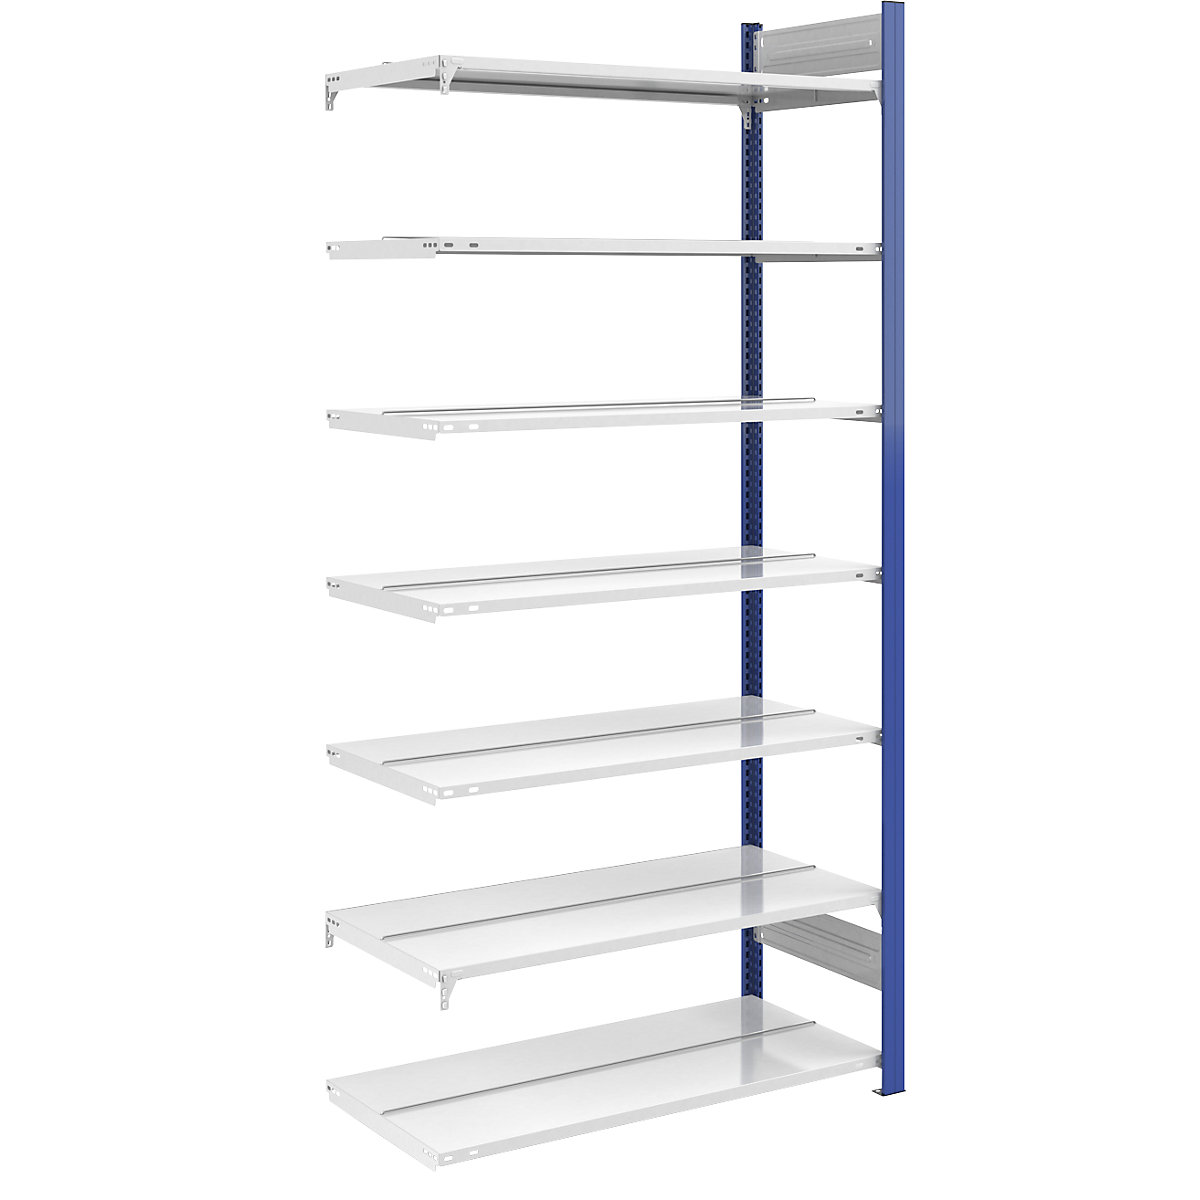 Boltless file shelving unit – hofe, double sided, height 2350 mm, WxD 1000 x 600 mm, extension shelf unit, blue / grey-6